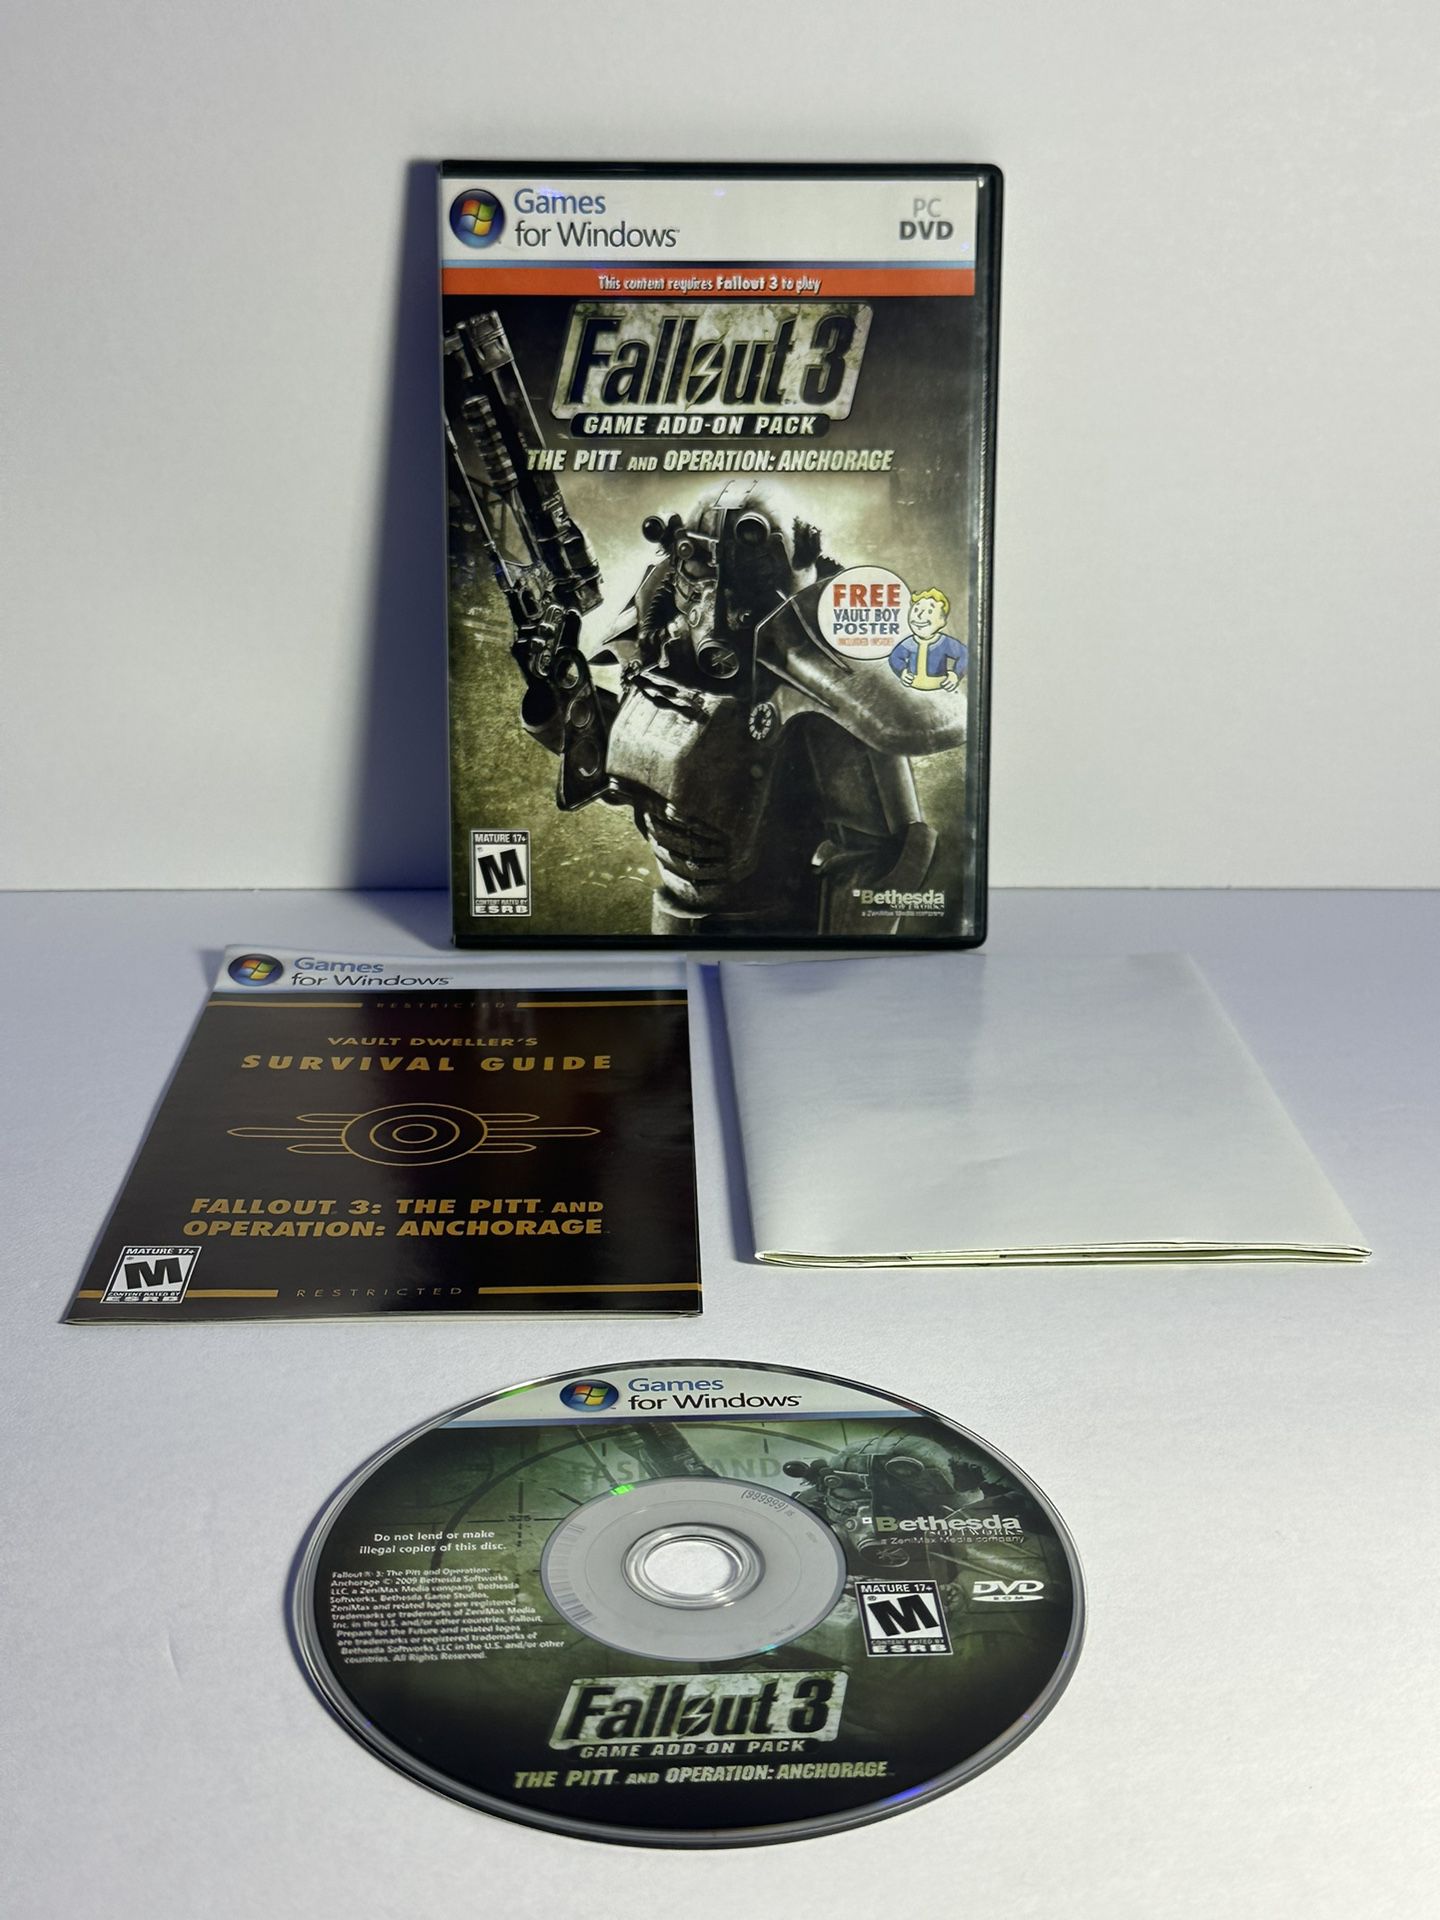 Fallout 3 (PC DVD ROM 2009) Ubisoft Complete w/ Original Insert & Map / Poster **COMPLETE